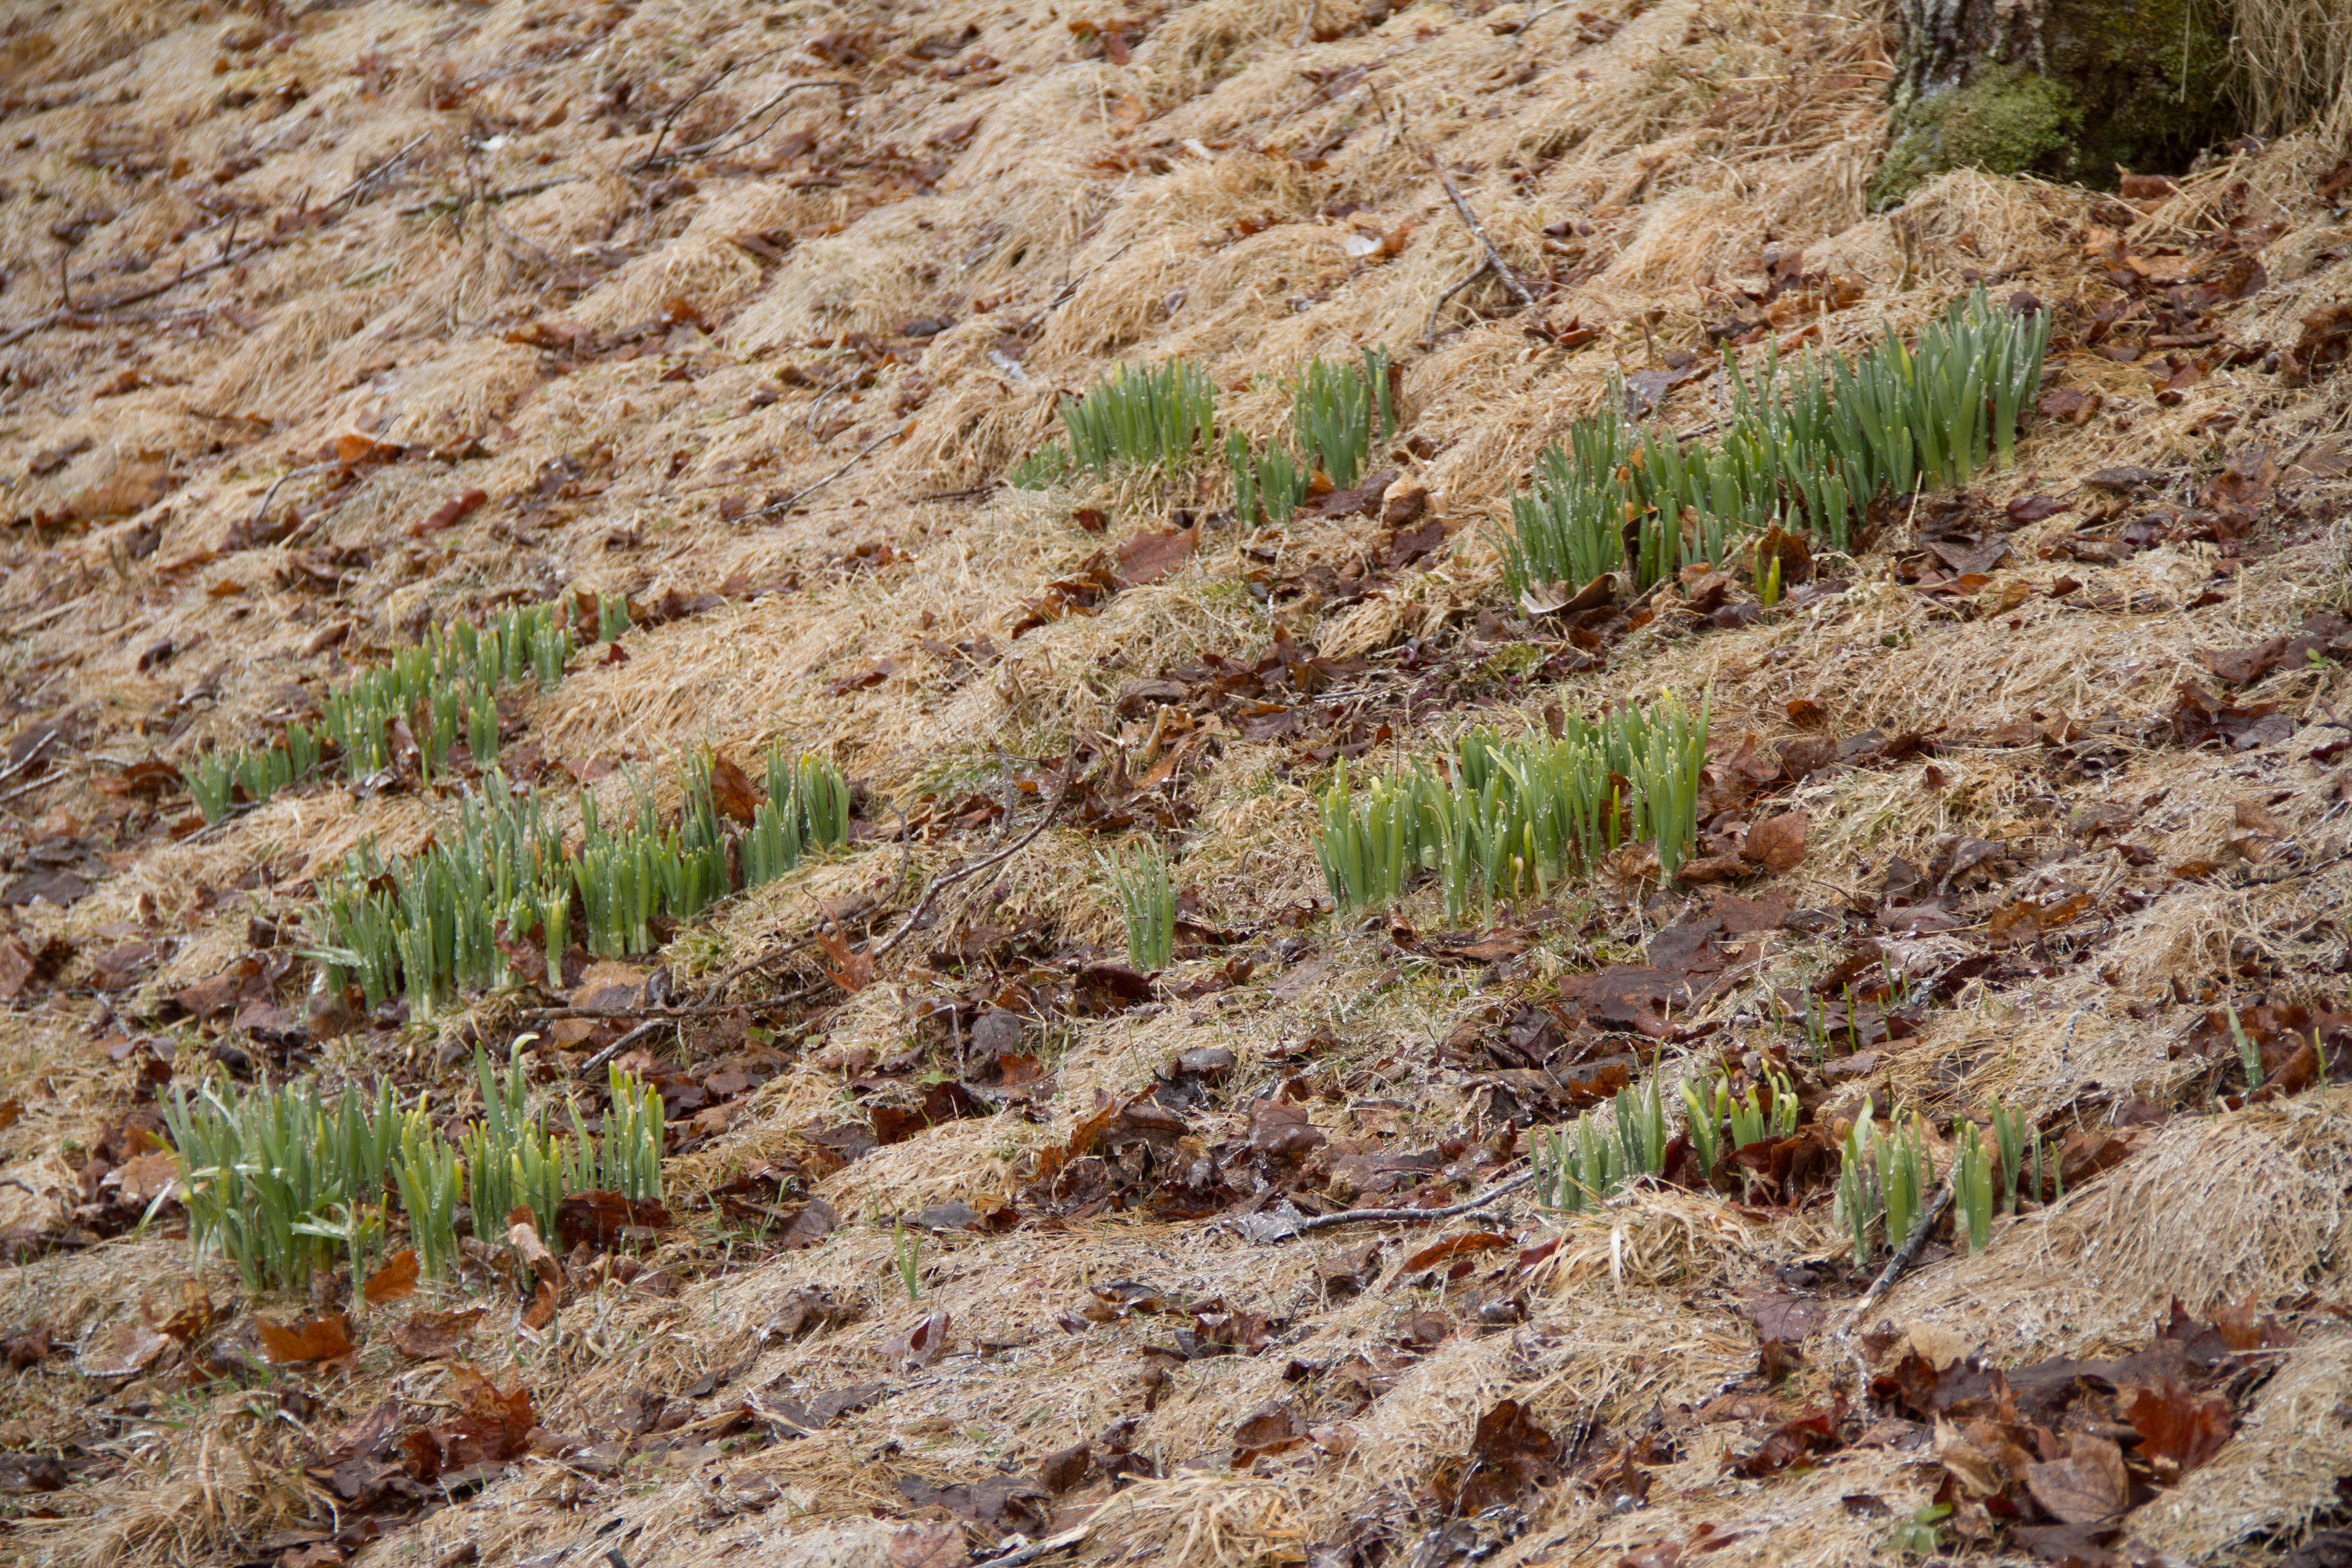 With sunny skies and rising temperatures predicted for the coming weekend, these daffodils may grow quickly.